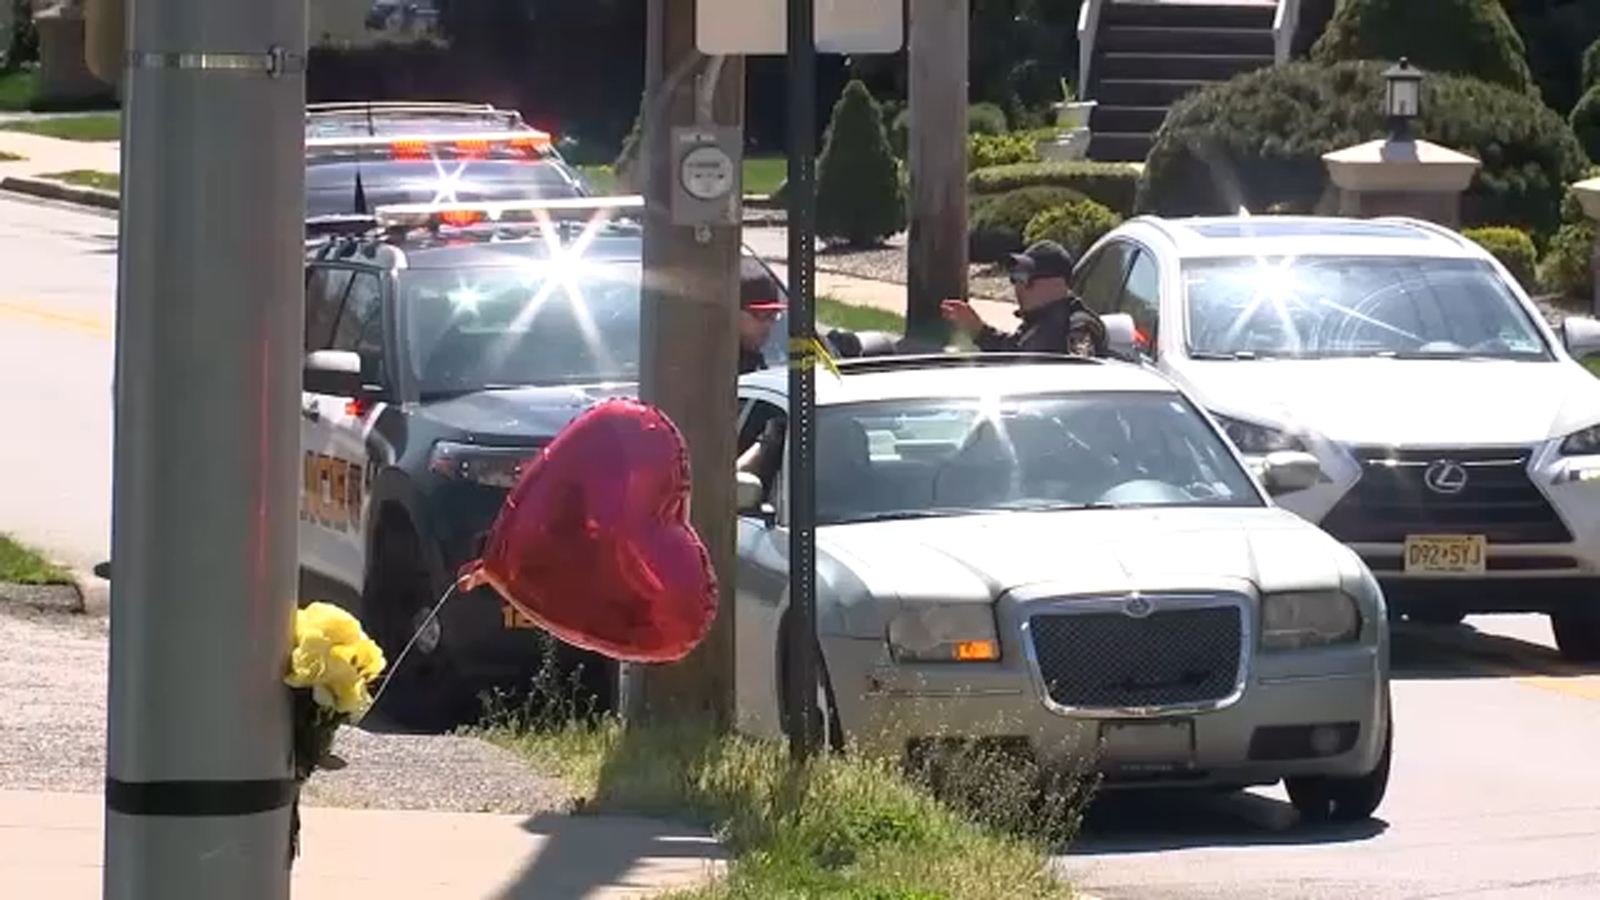 Ridgefield pedestrian killed: 15-year-old girl struck by hit-and-run driver in NJ [Video]